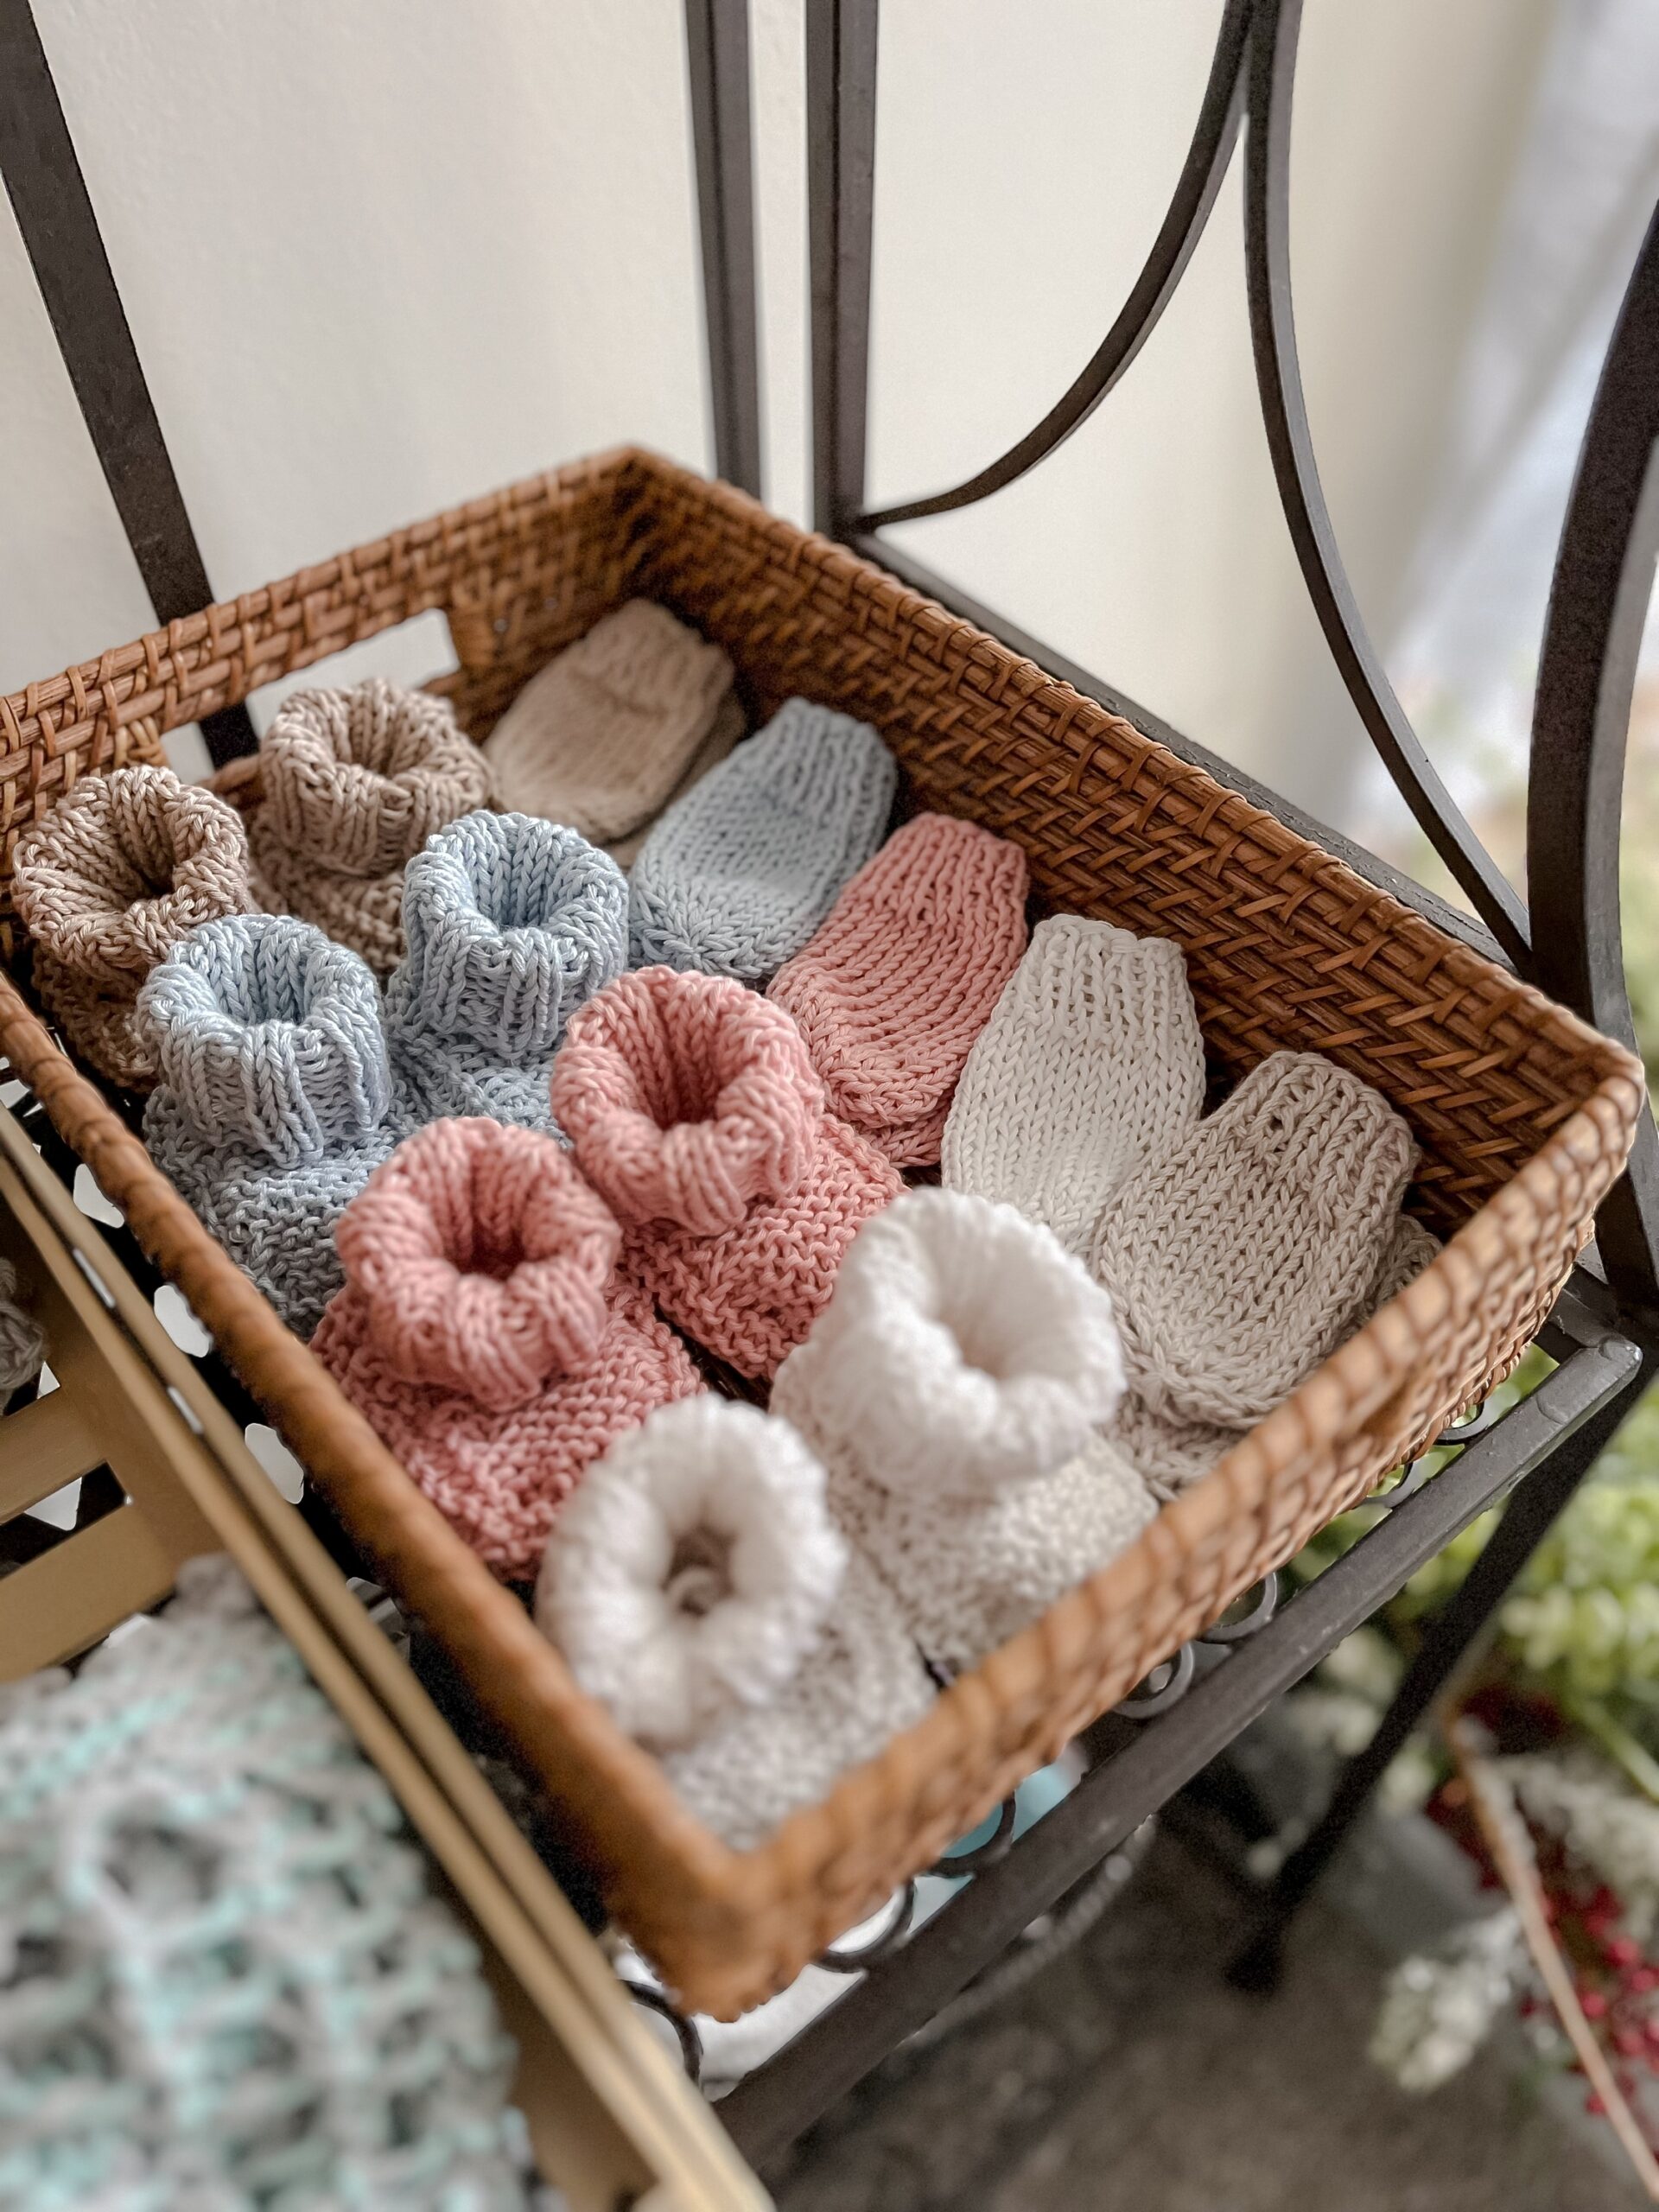 A wicker basket holds organic cotton newborn booties and mitts. The booties are tan, blue, pink, and white, and the mitts are tan, blue, pink, white, and gray.